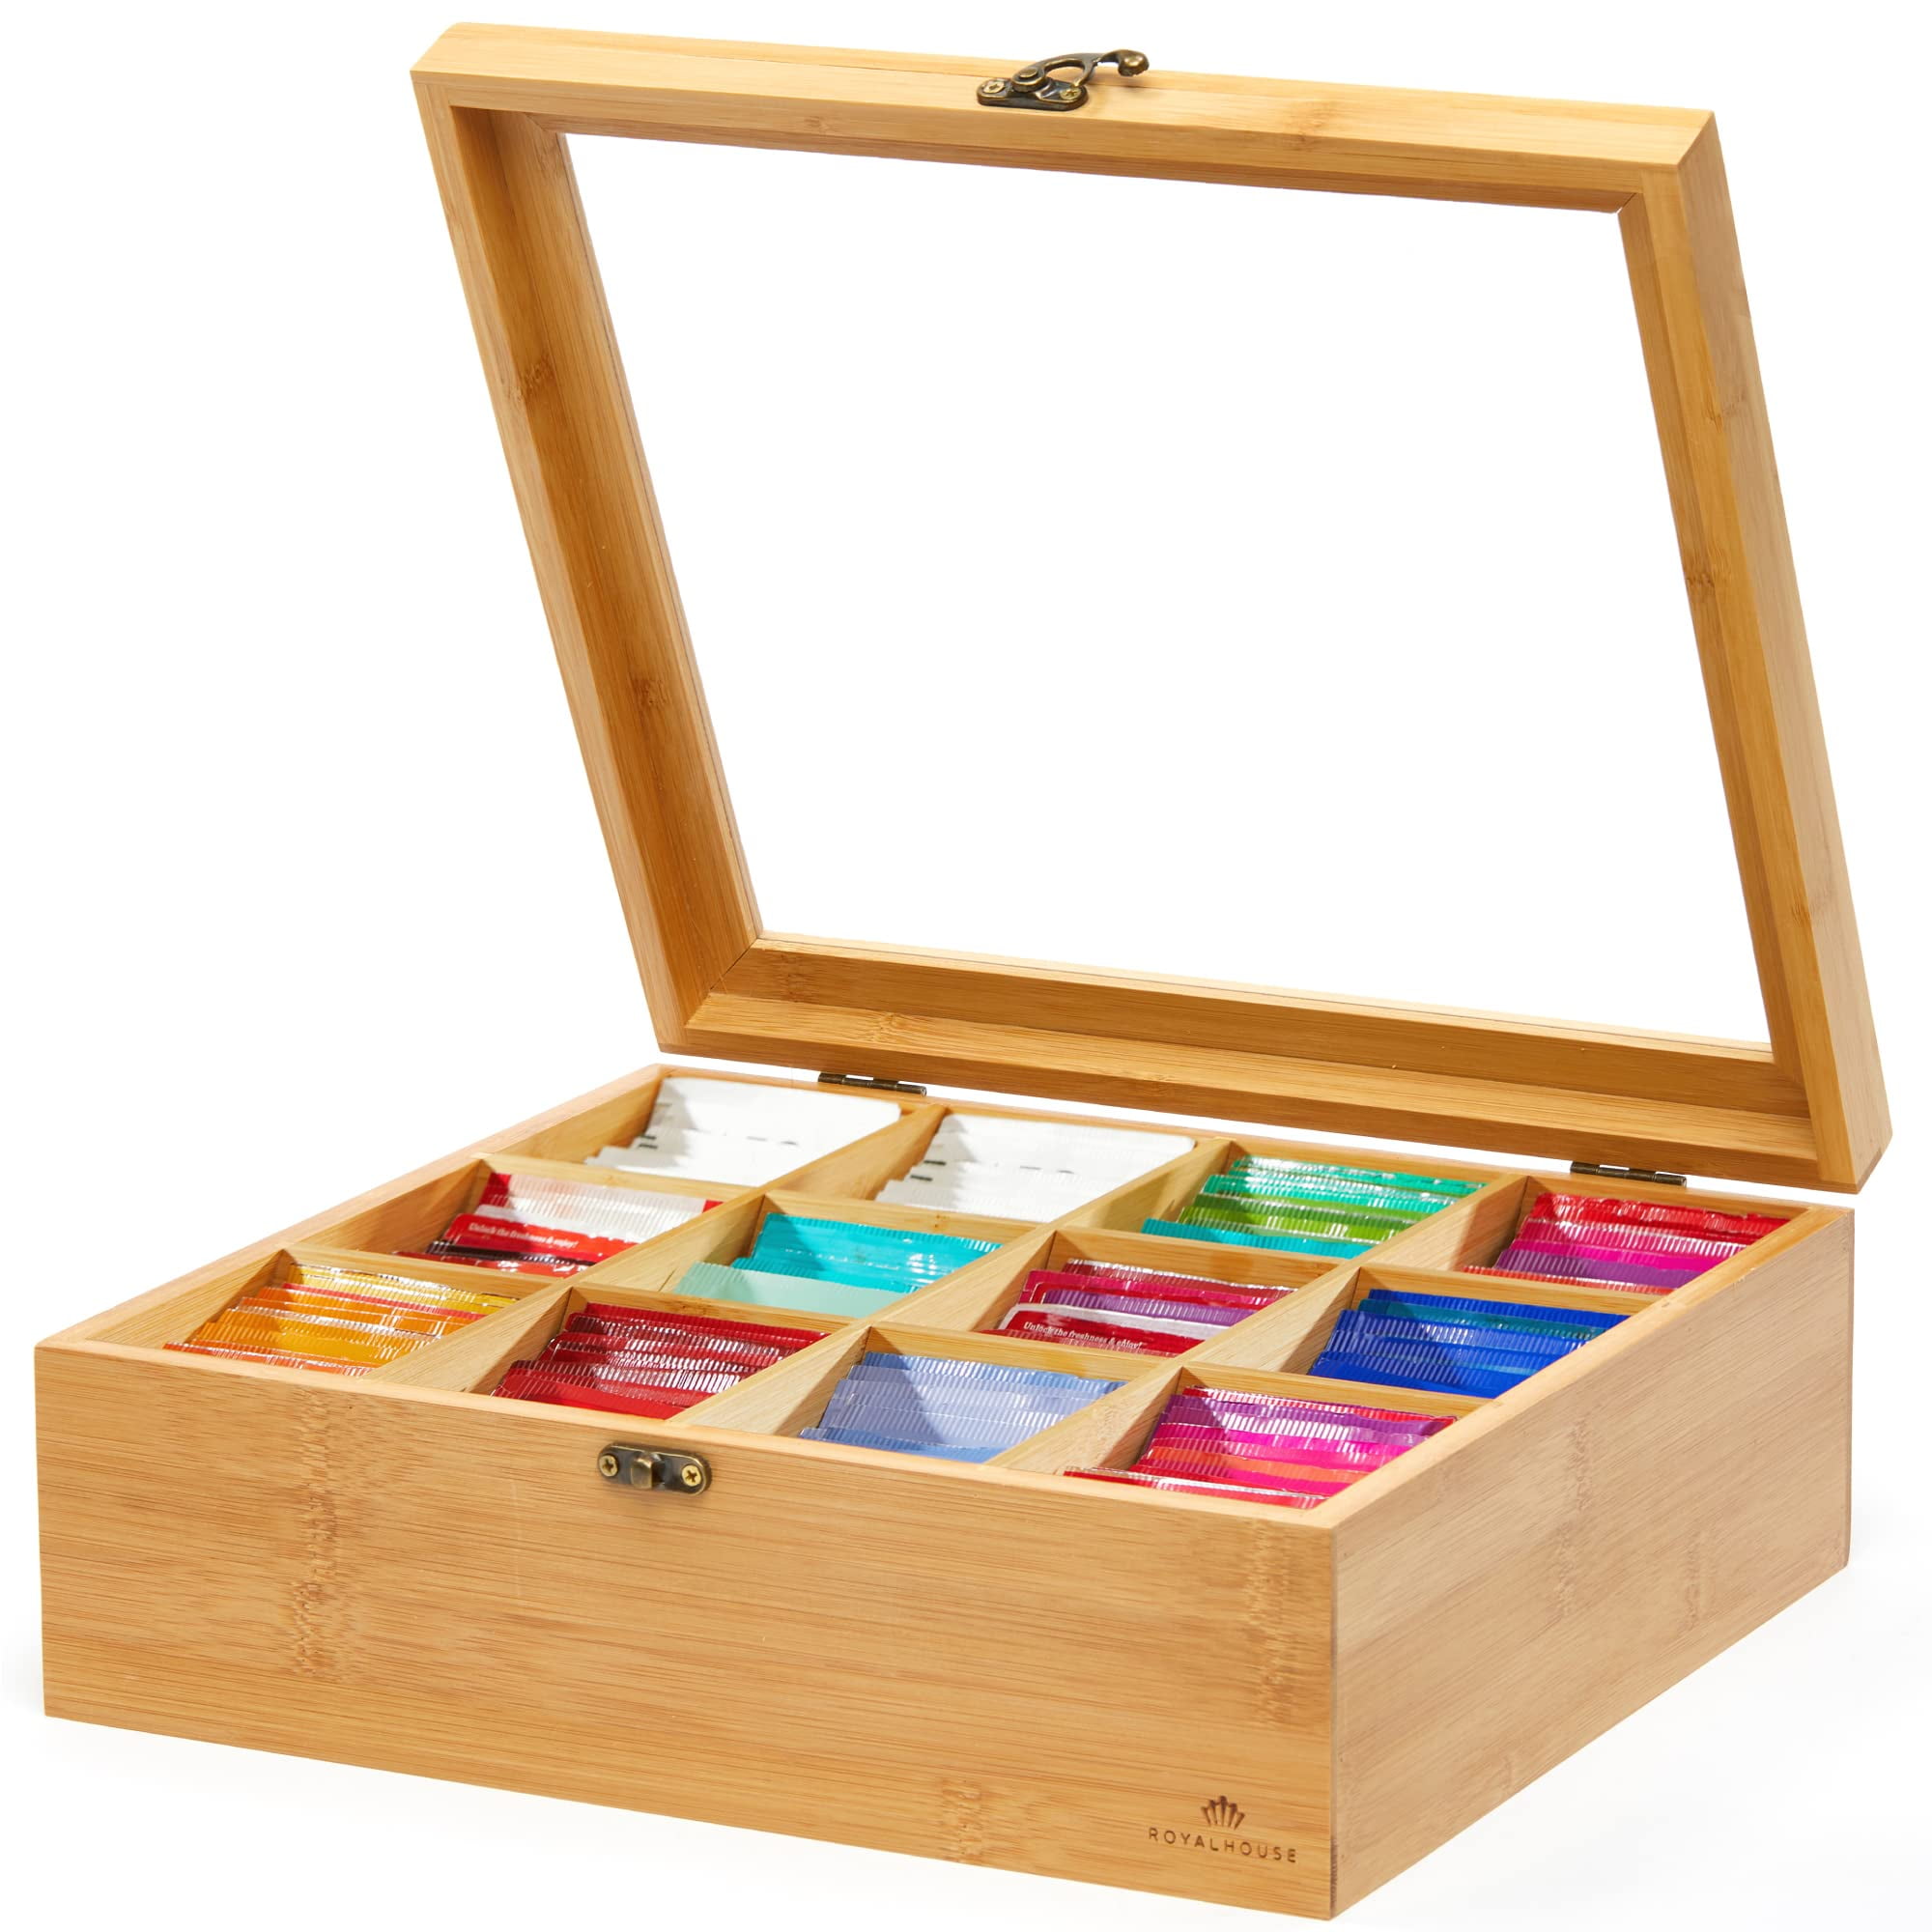 Signature Living Bamboo Wooden Tea Box Organizer Storage with Drawer (8  Compartments) Large Tea Organizer Box for Tea Bags and Loose Tea - Sturdy